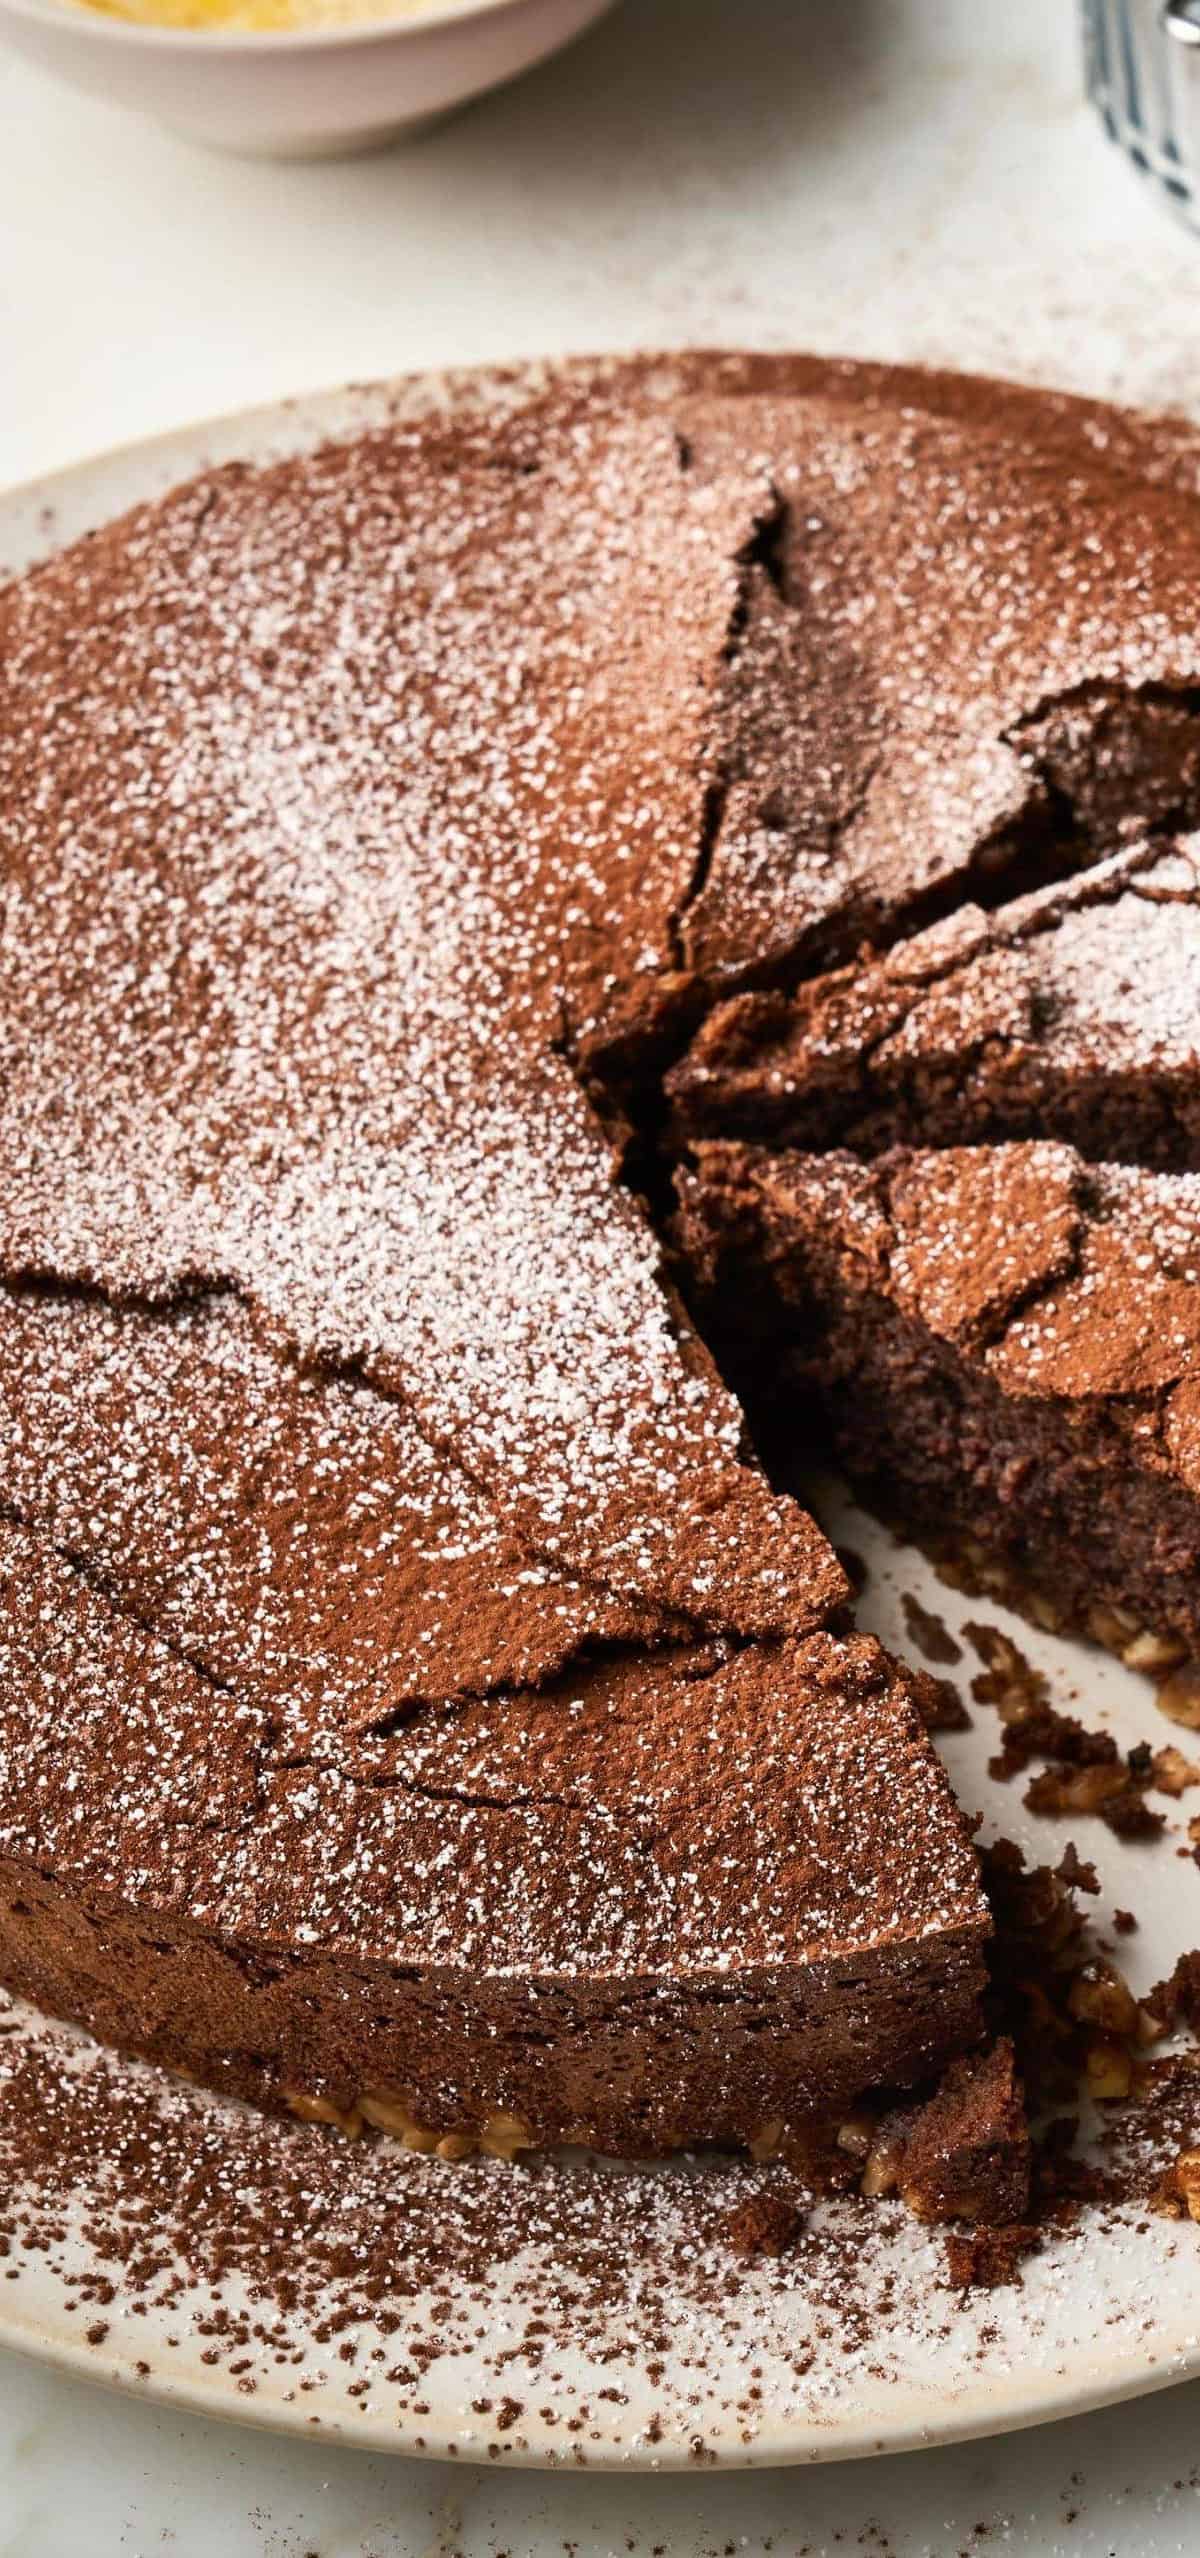  Our luscious Chocolate Chestnut Cake is perfect for any chocolate lover.